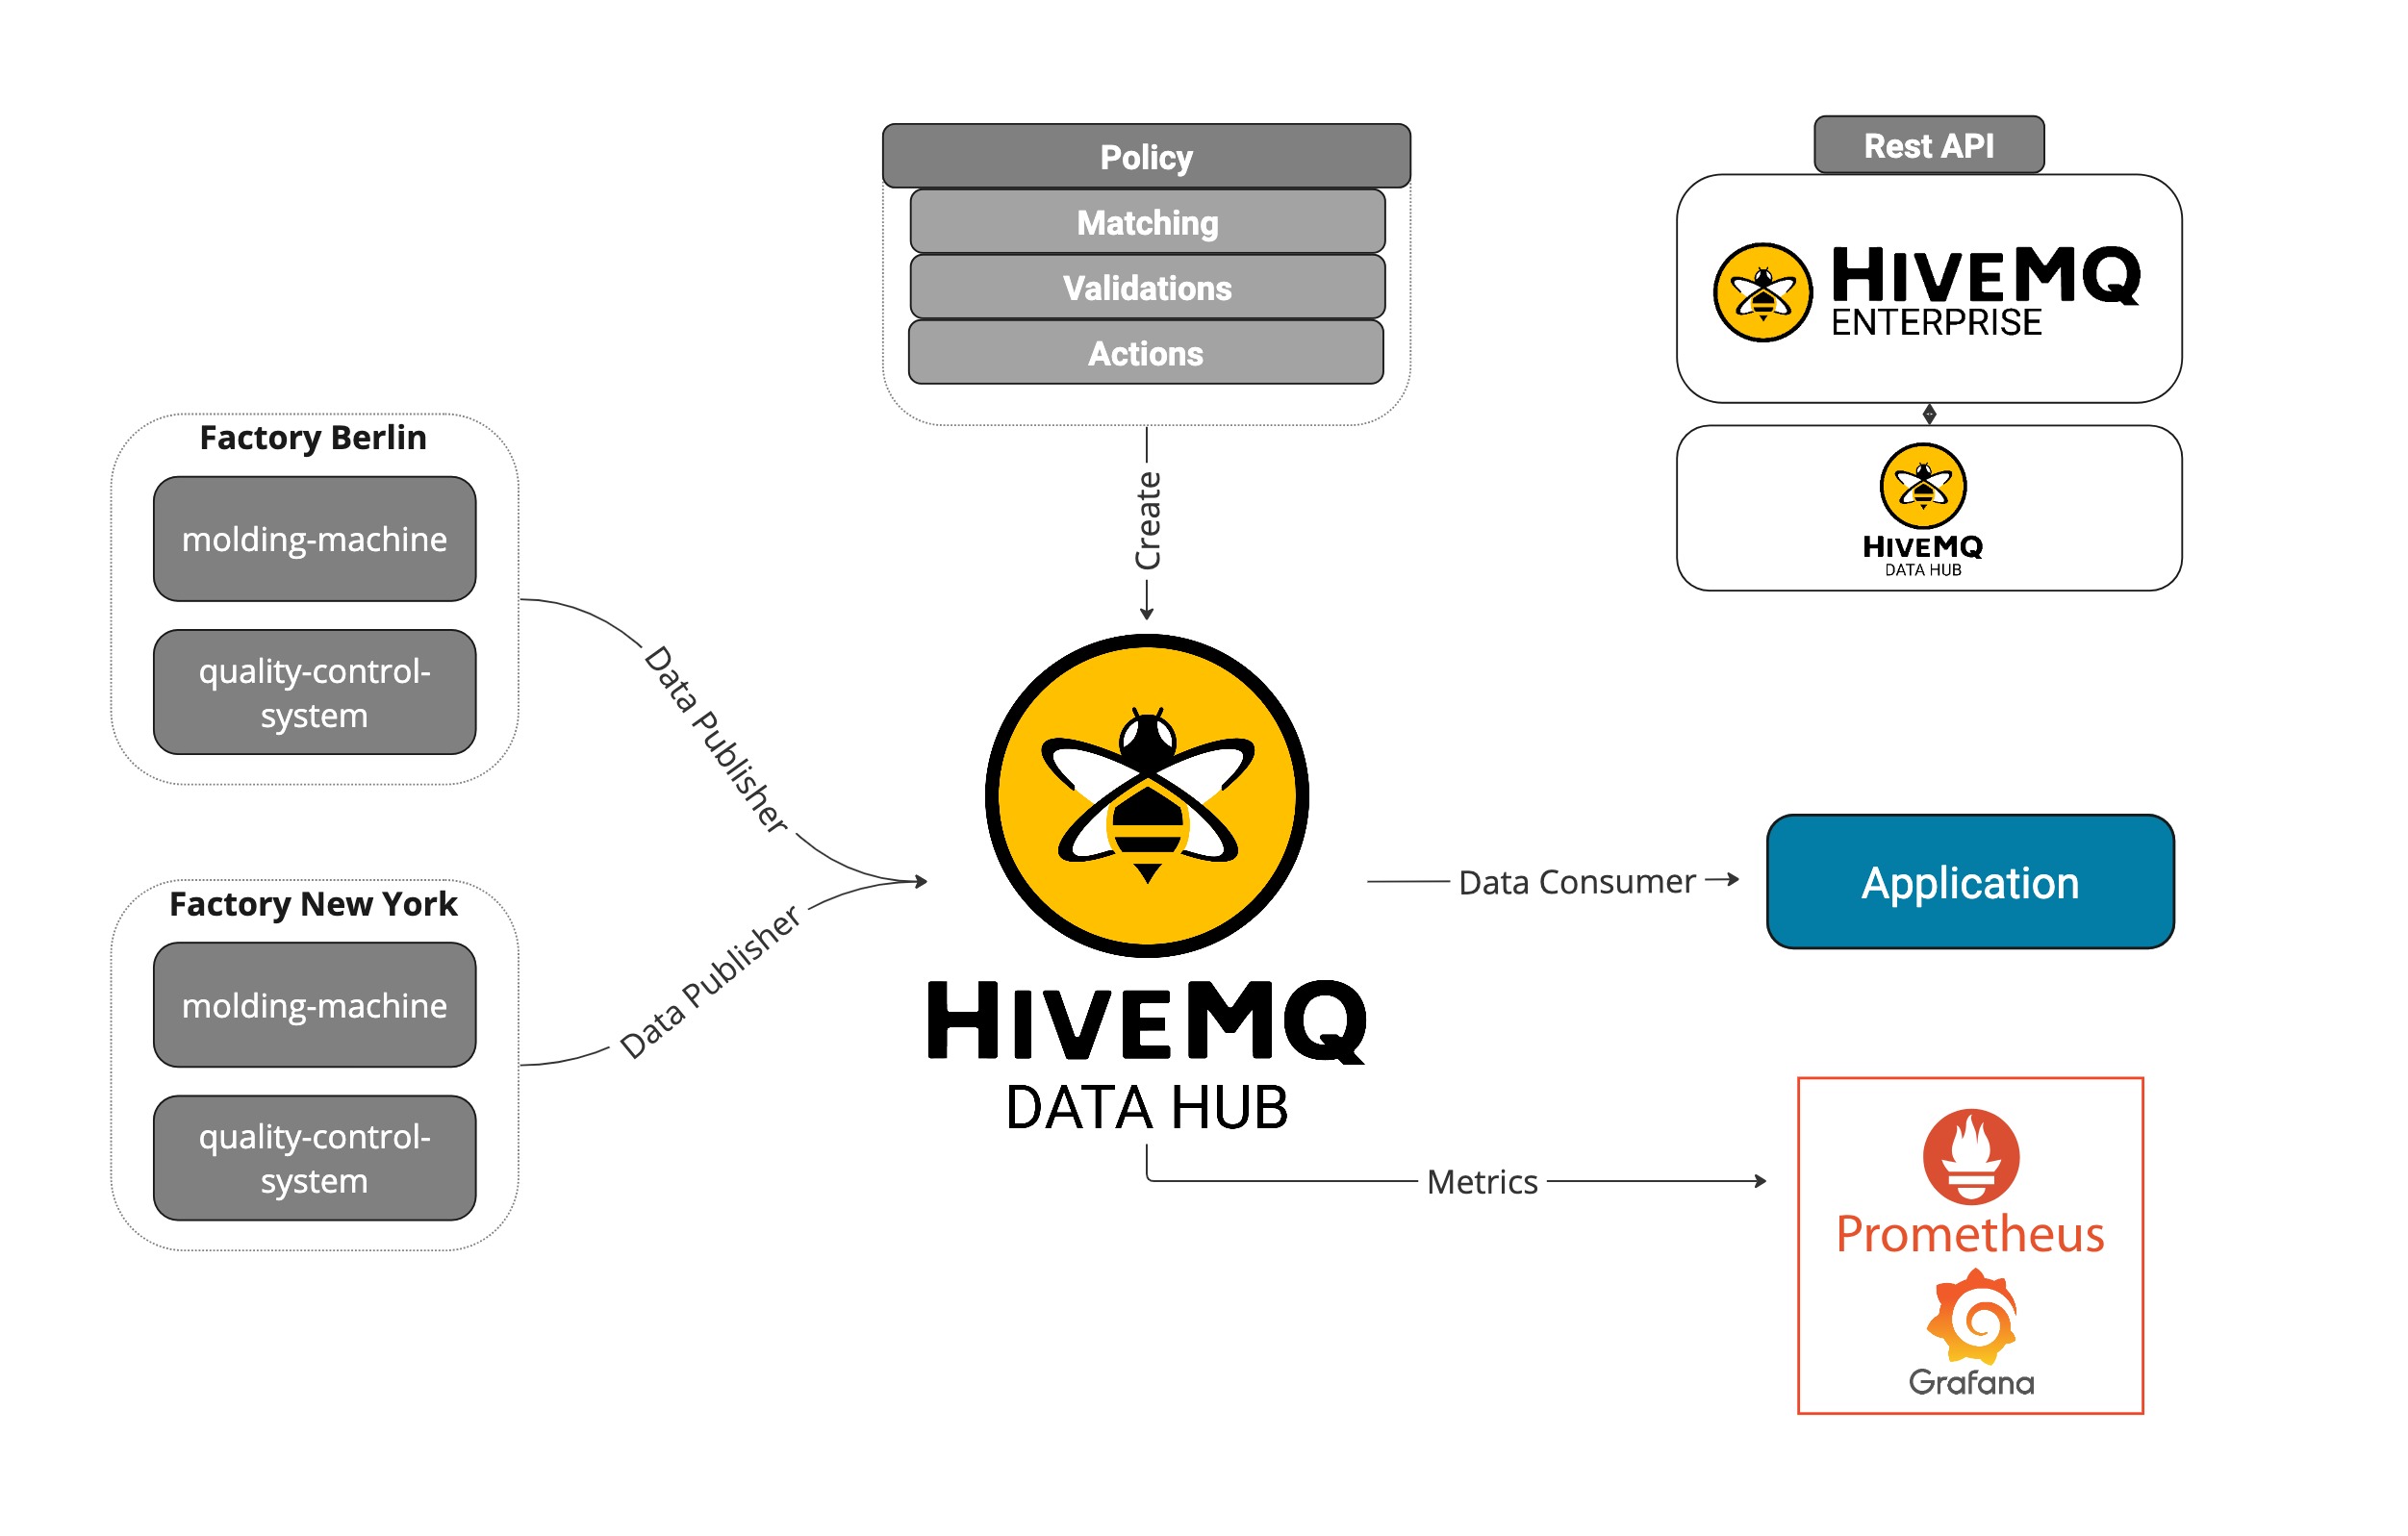 HiveMQ Data Hub Improves Manufacturing Data Quality with IIoT and MQTT